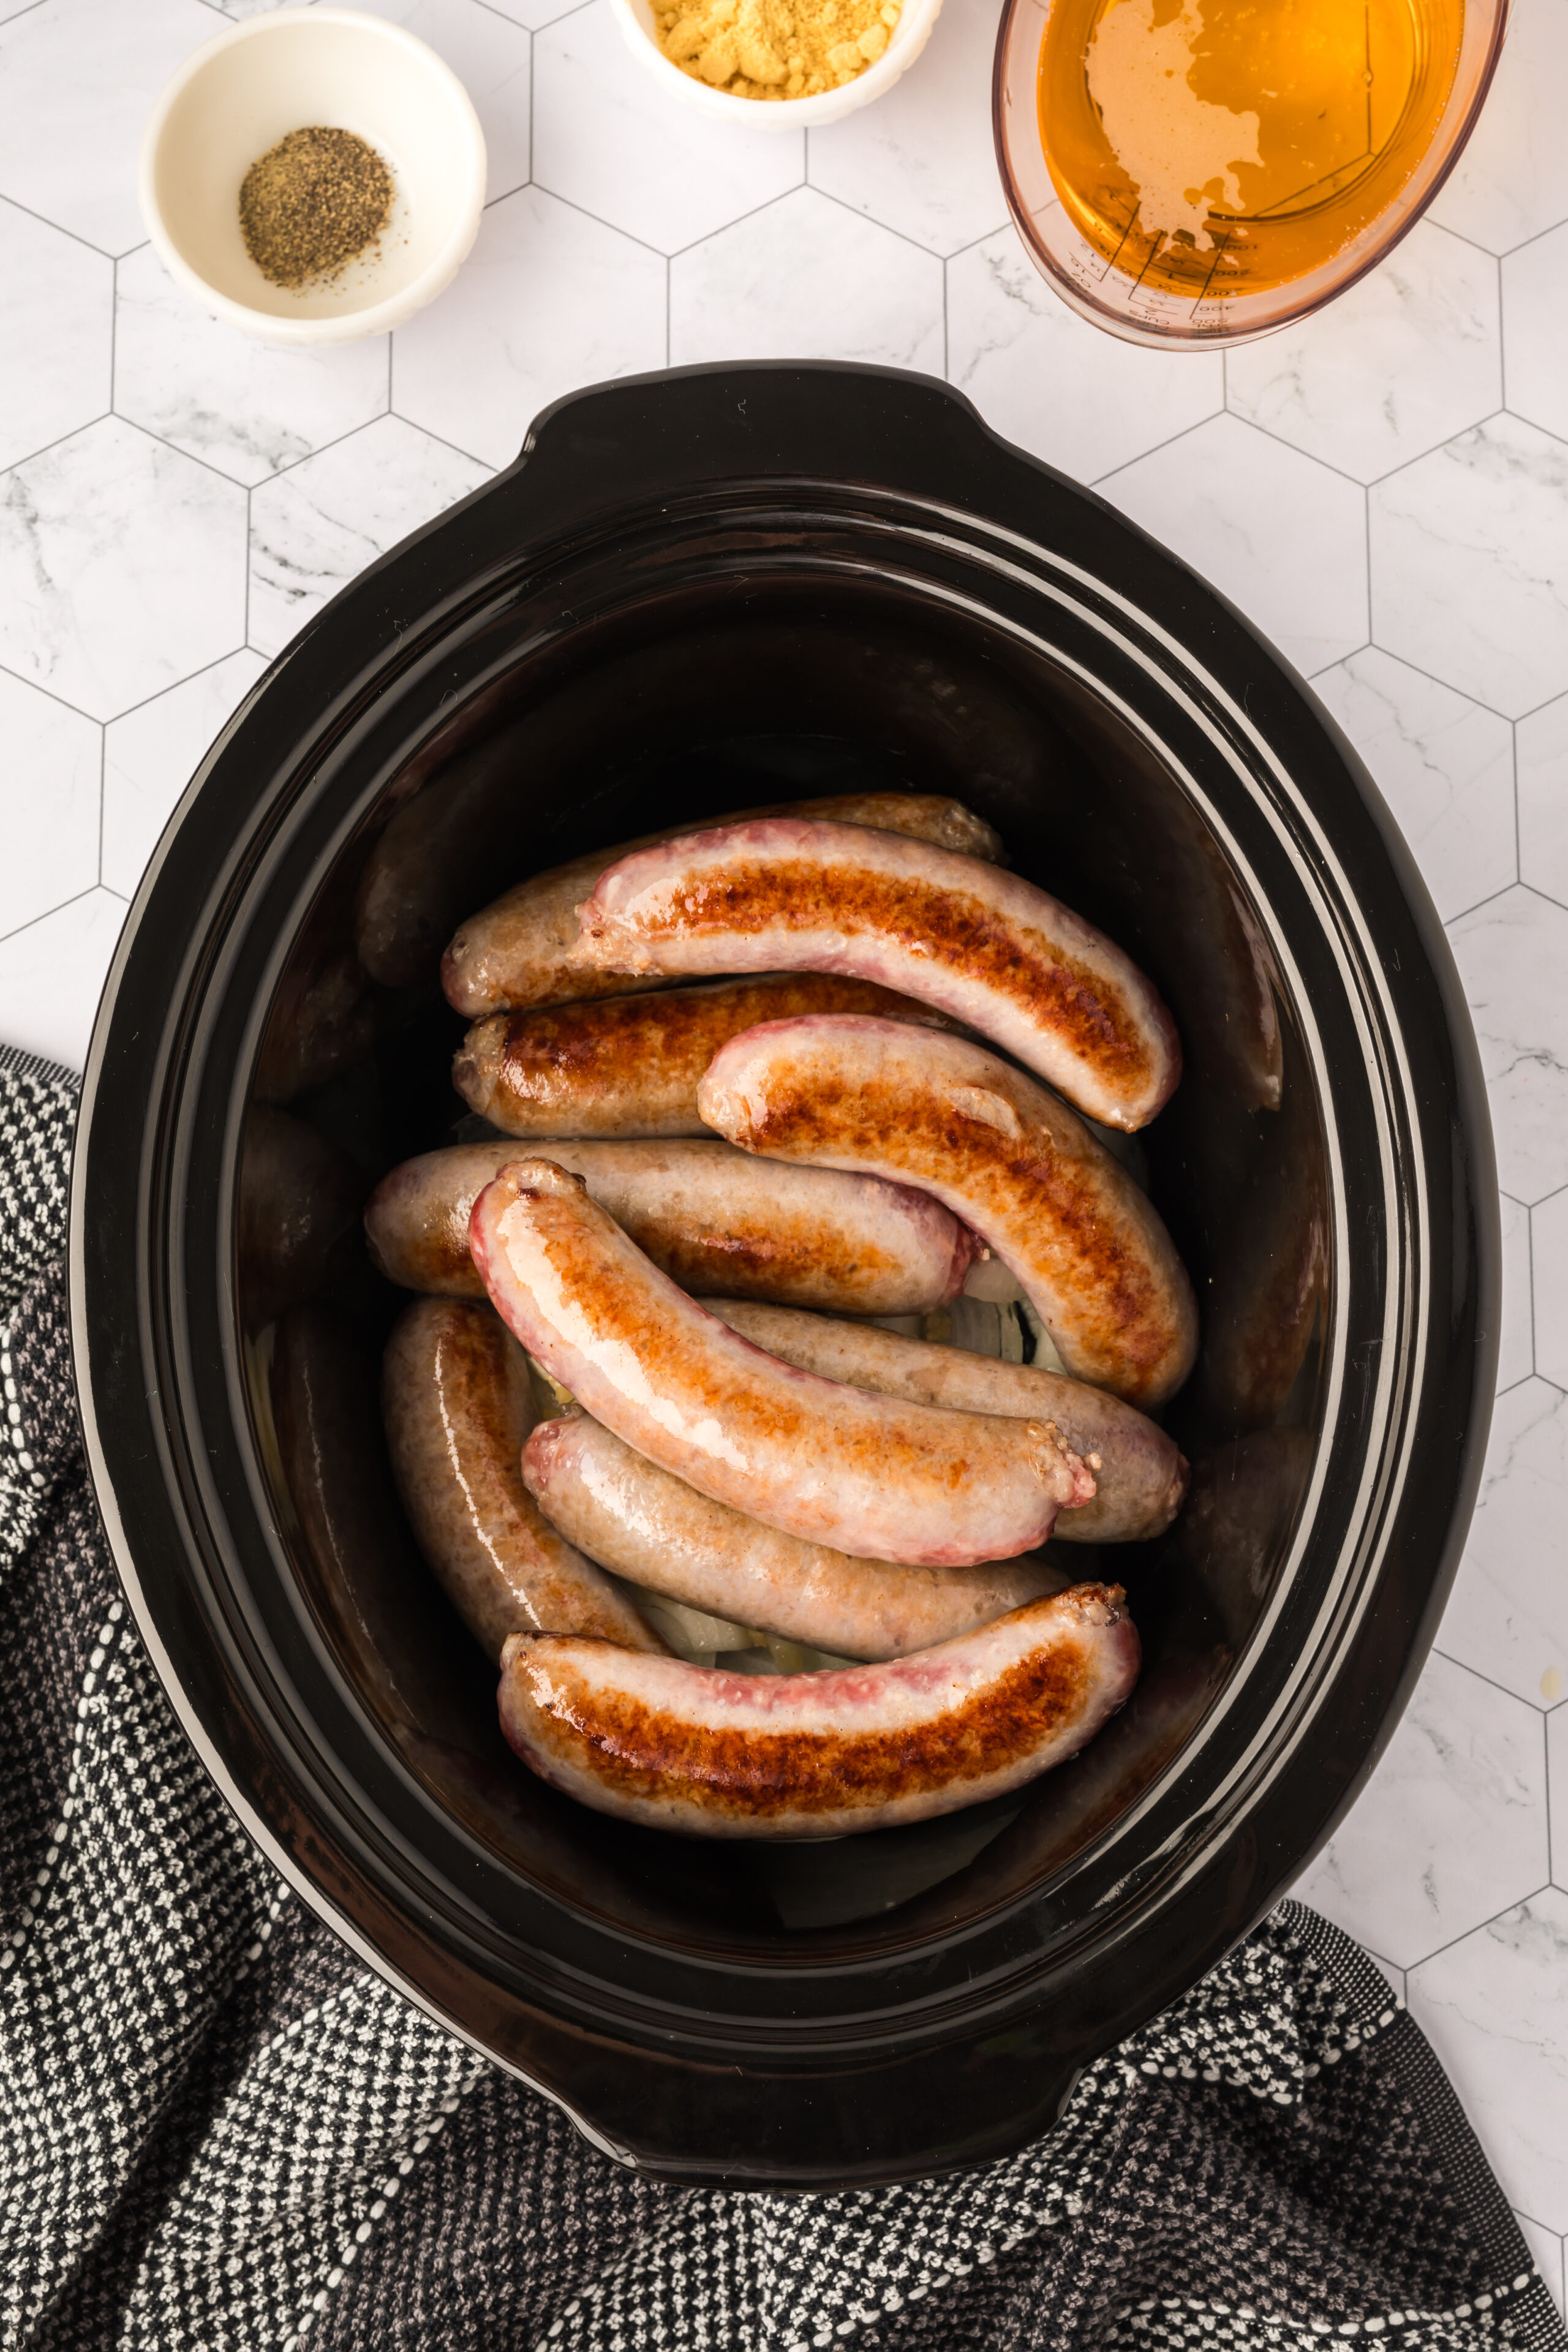 Placing the seared brats in the slow cooker